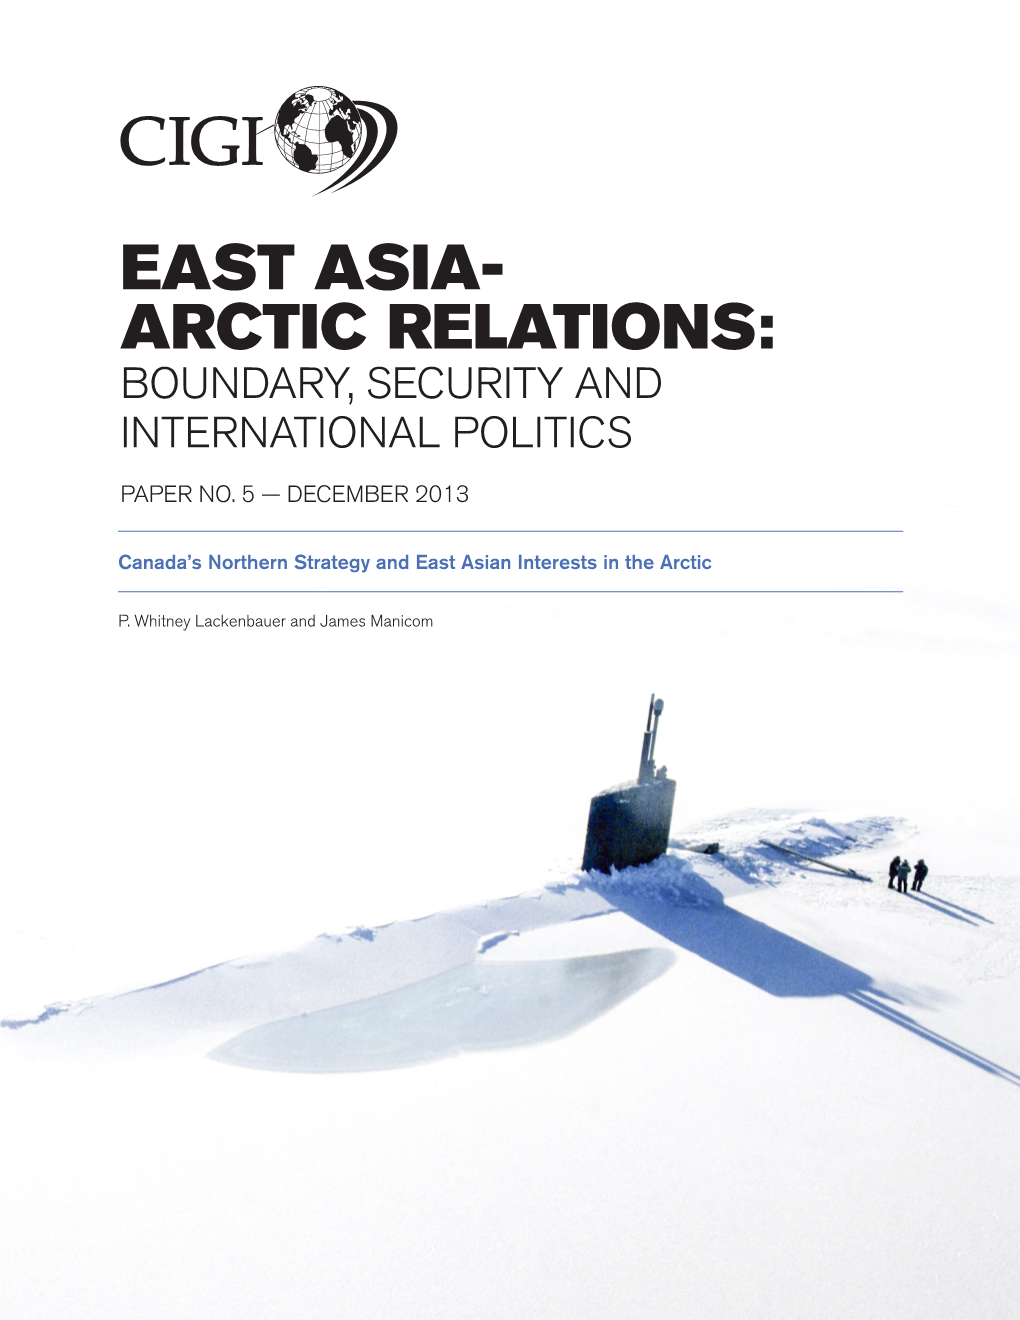 East Asia- Arctic Relations: Boundary, Security and International Politics